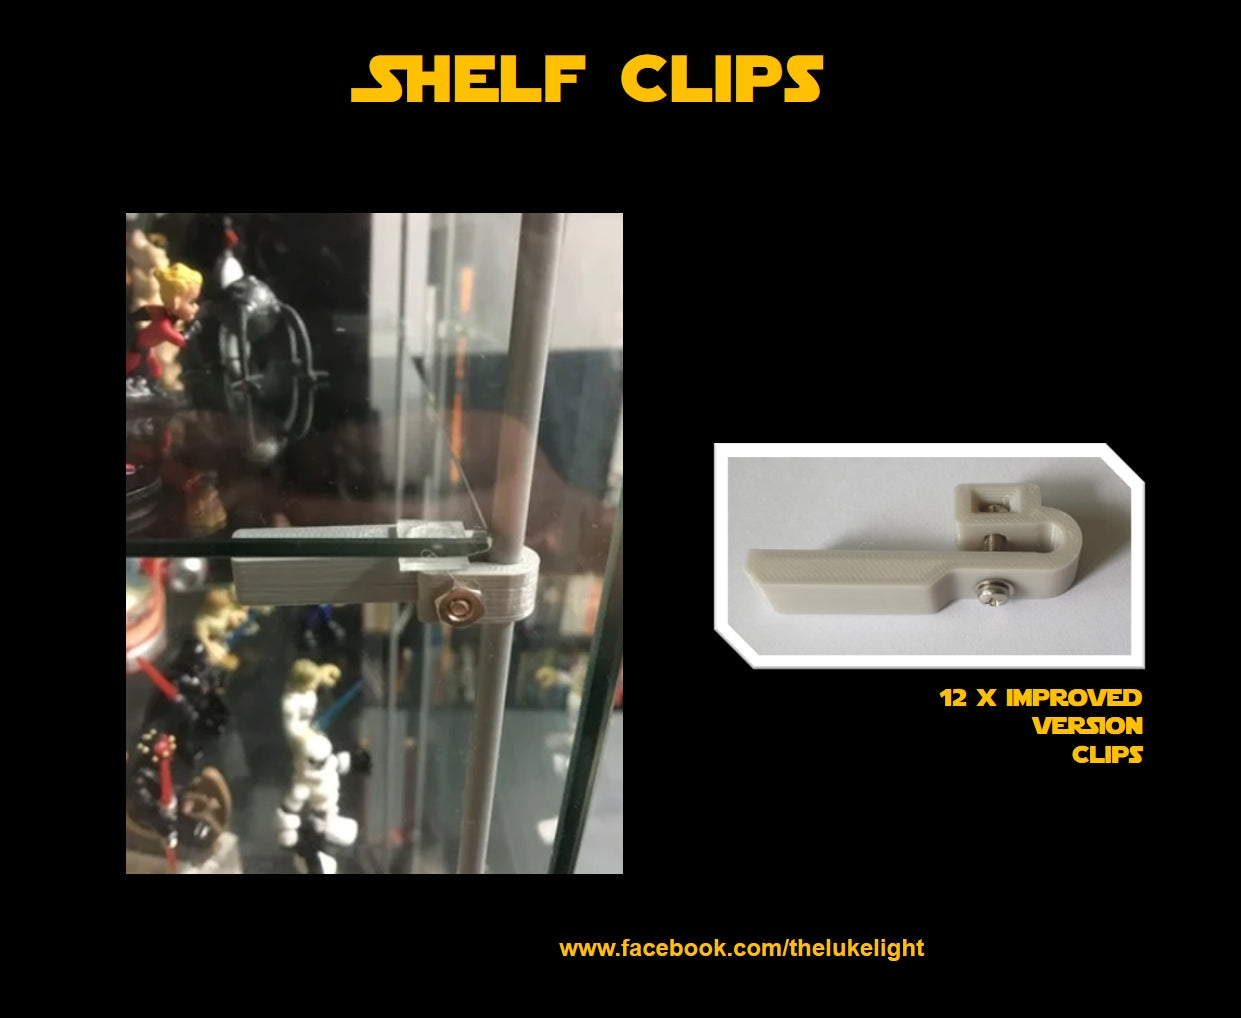 Add On - Shelf Clips (Suitable for Detolf)